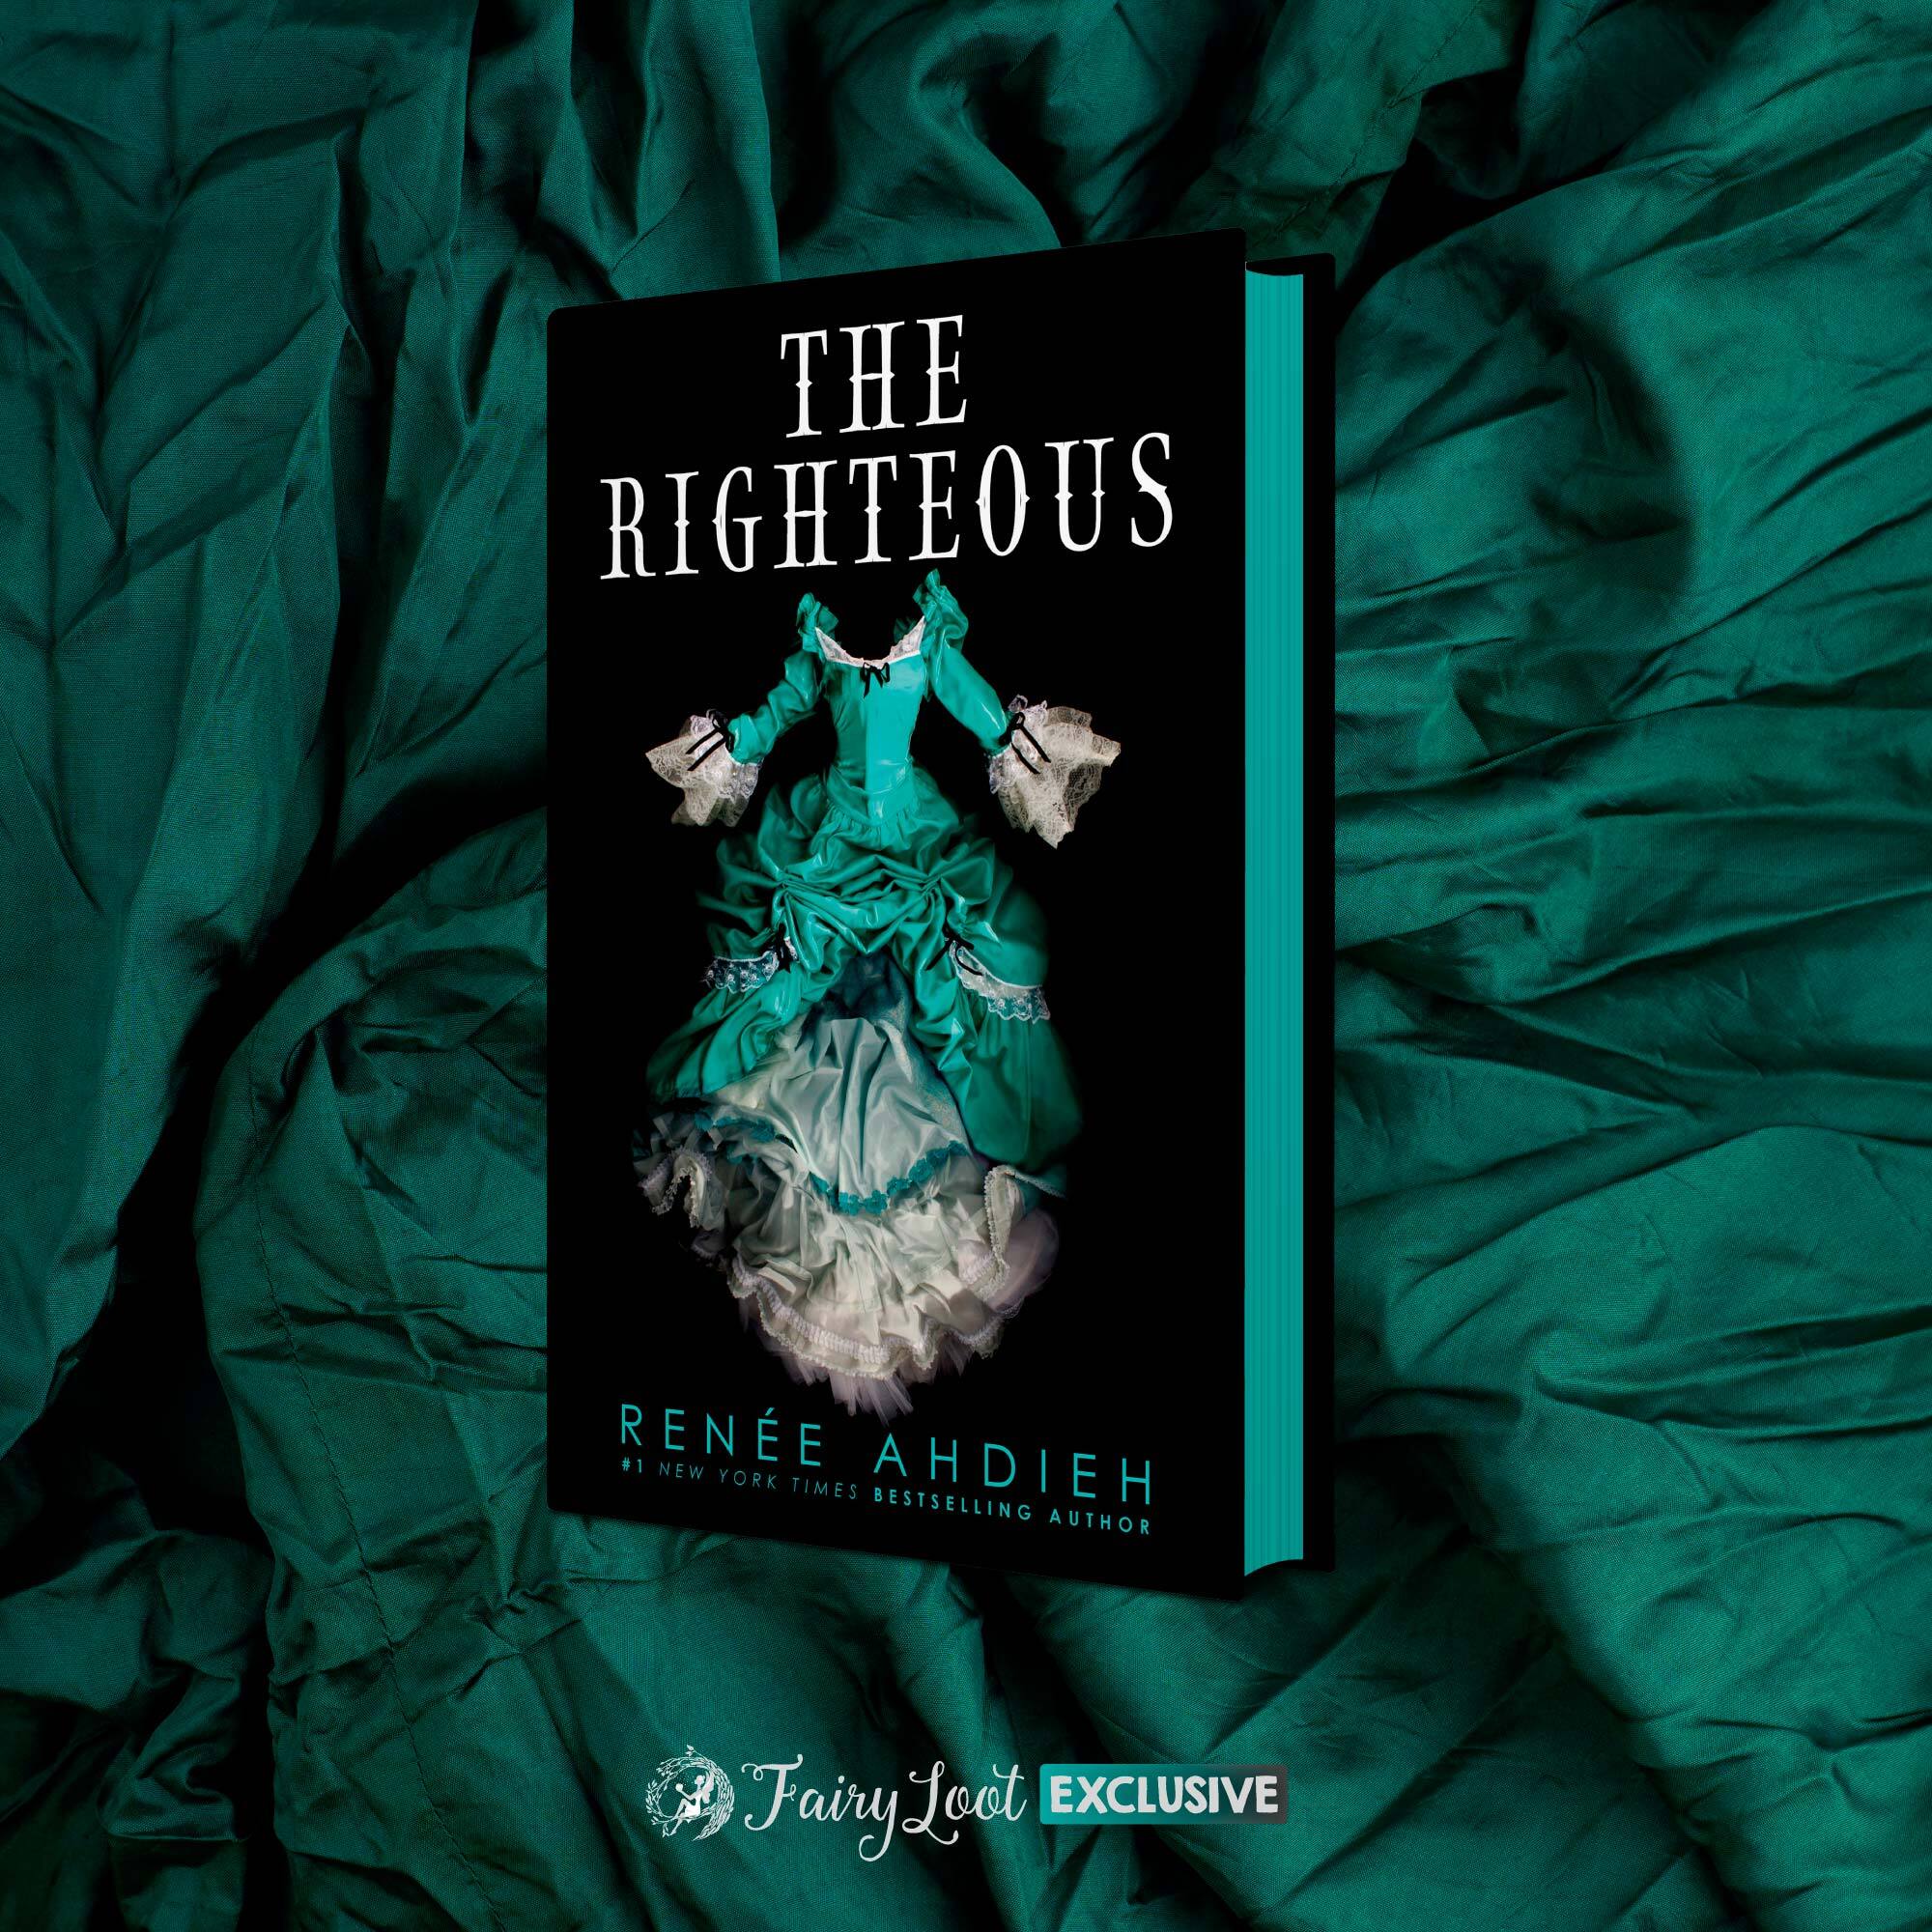 The Righteous by Renée Ahdieh